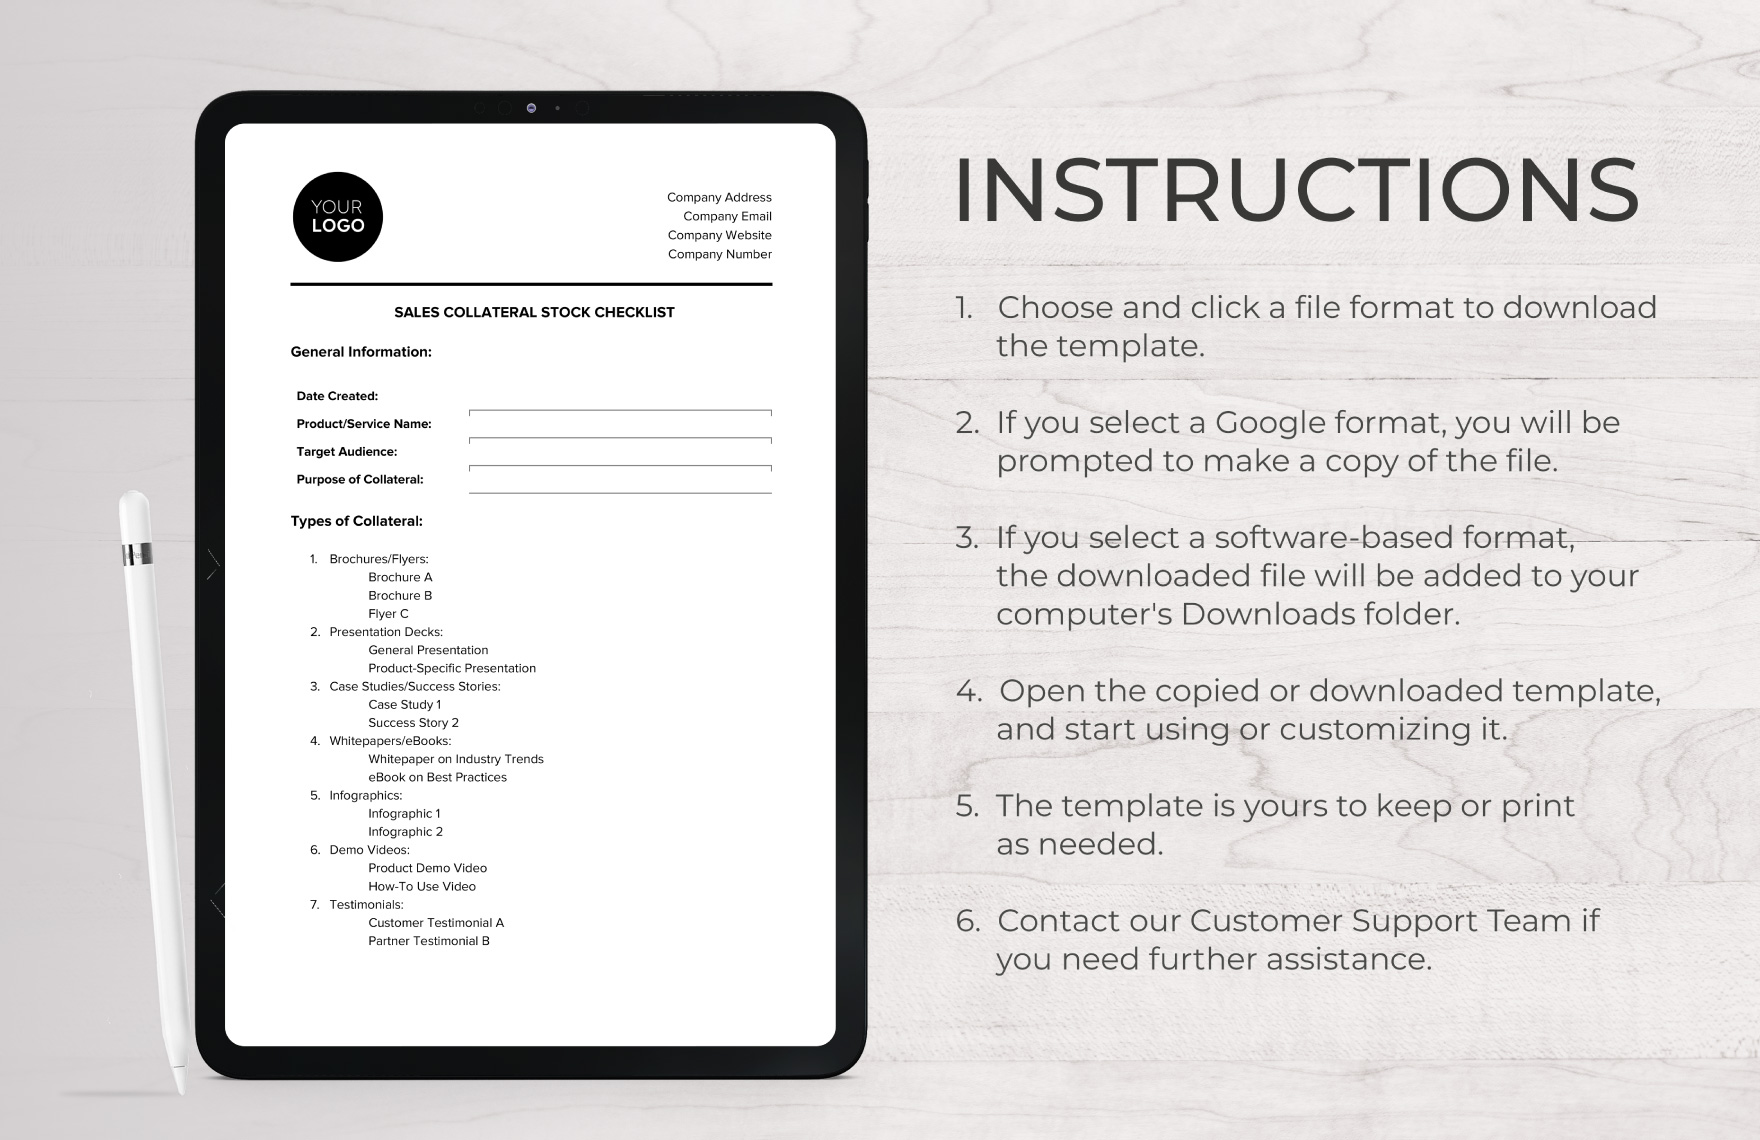 Sales Collateral Stock Checklist Template